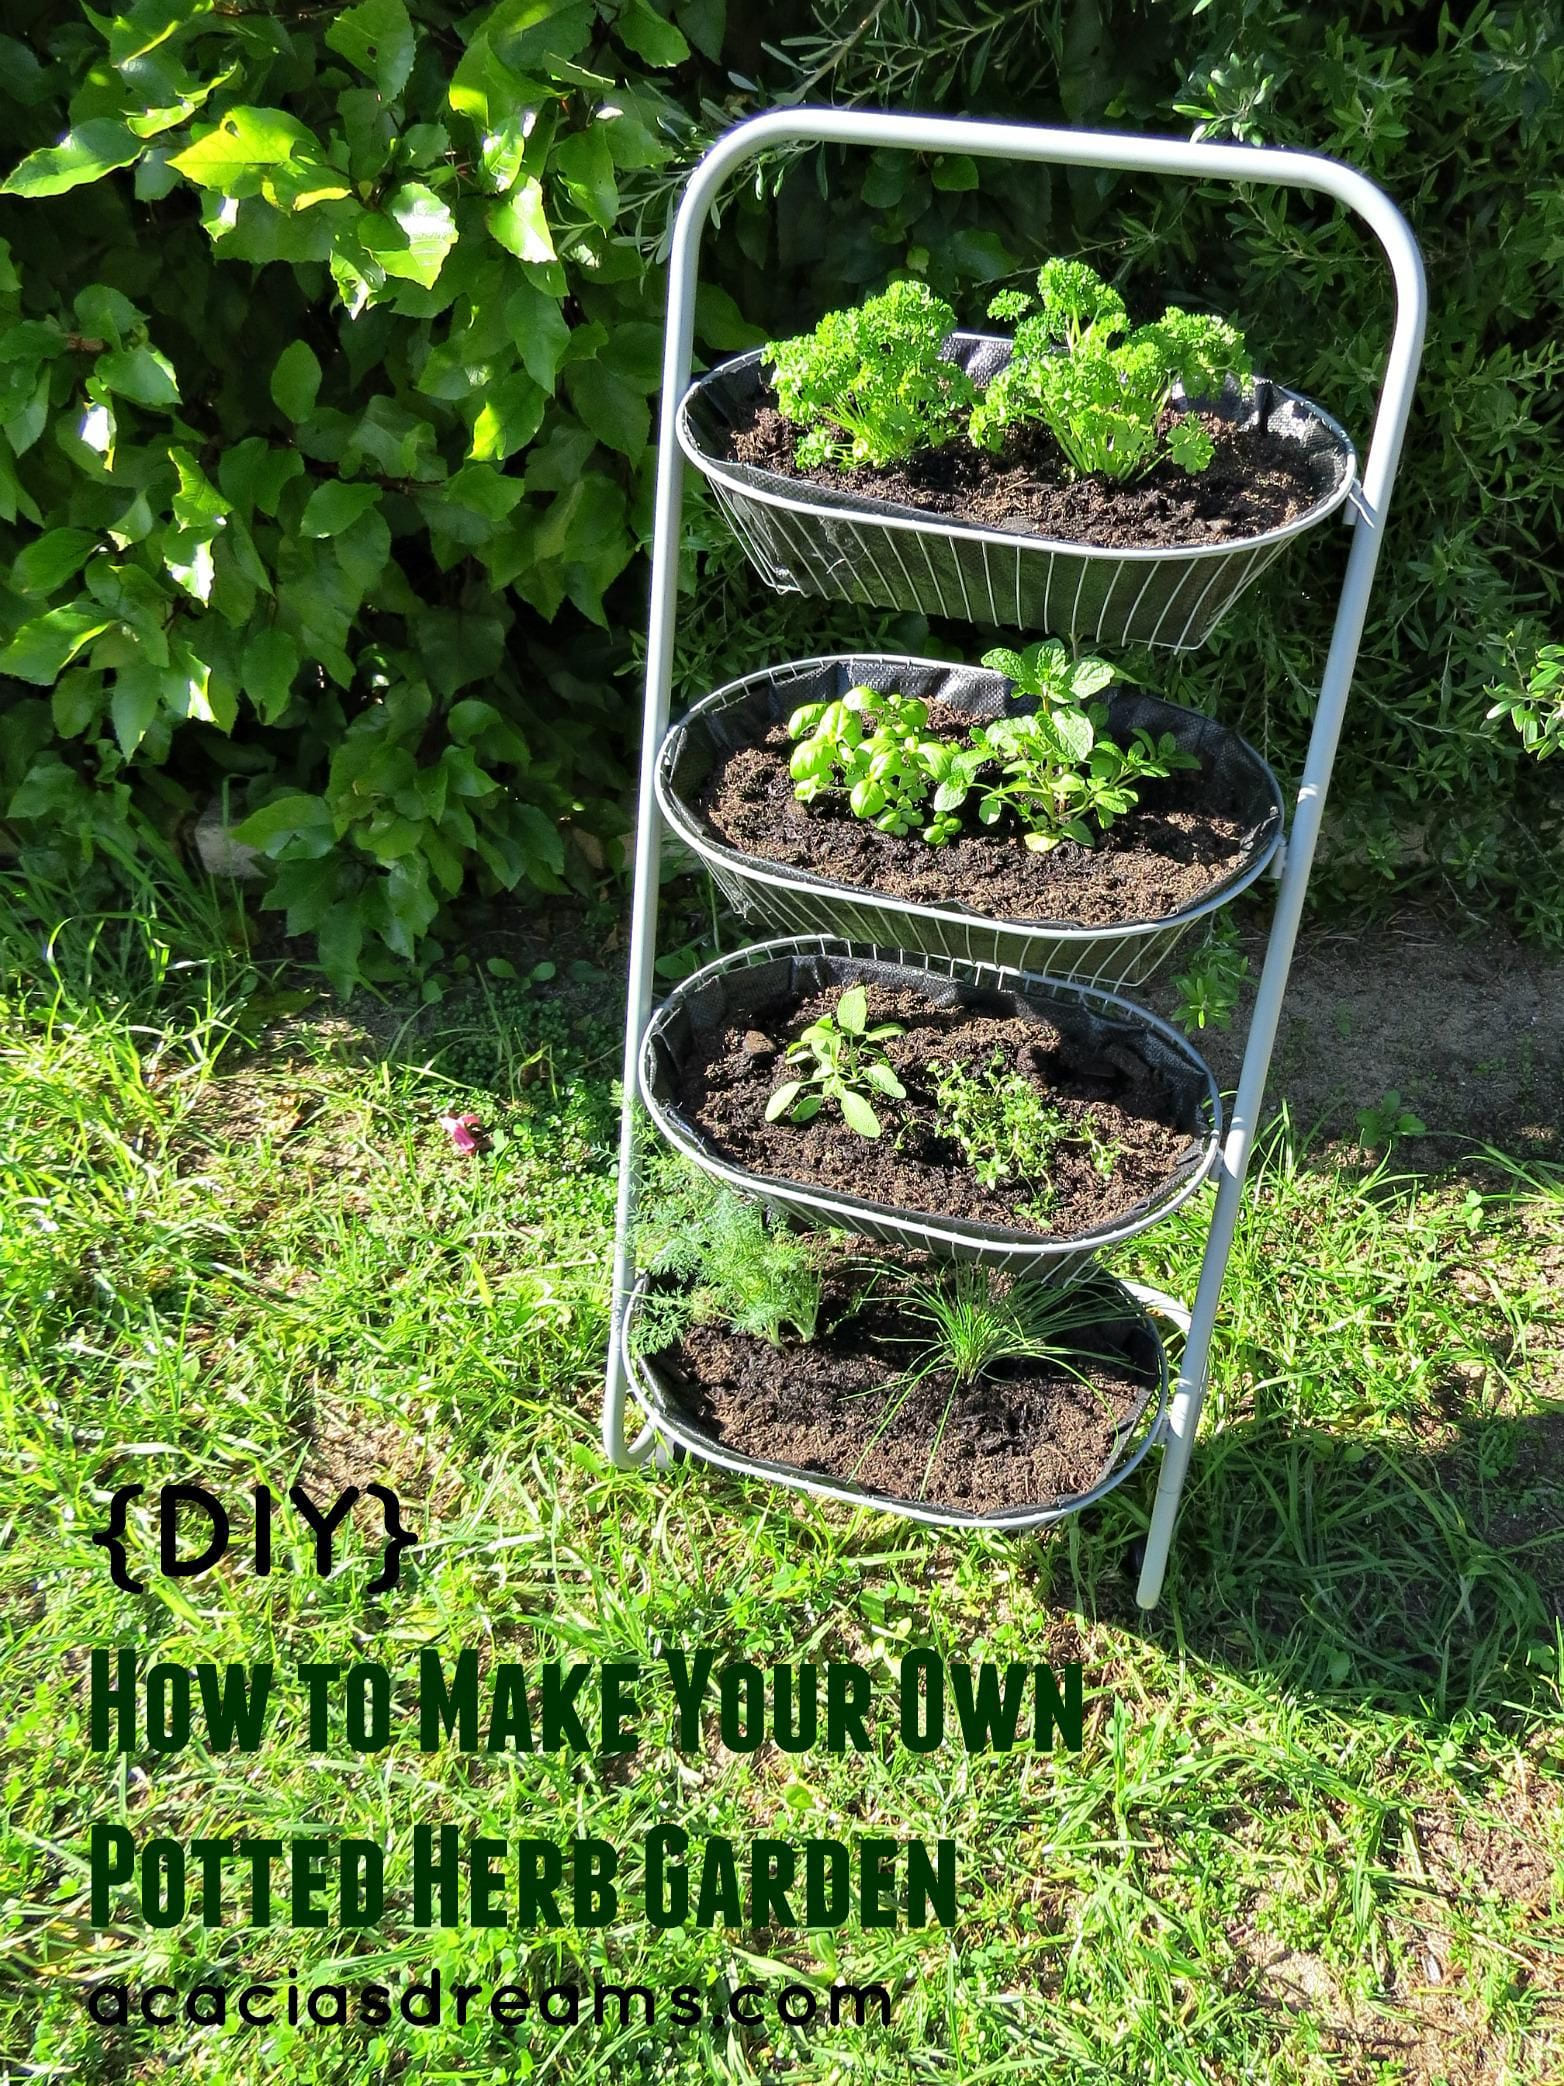 Simphome.com diy how to make your own potted herb garden diy pinterest inside potted herb garden ideas